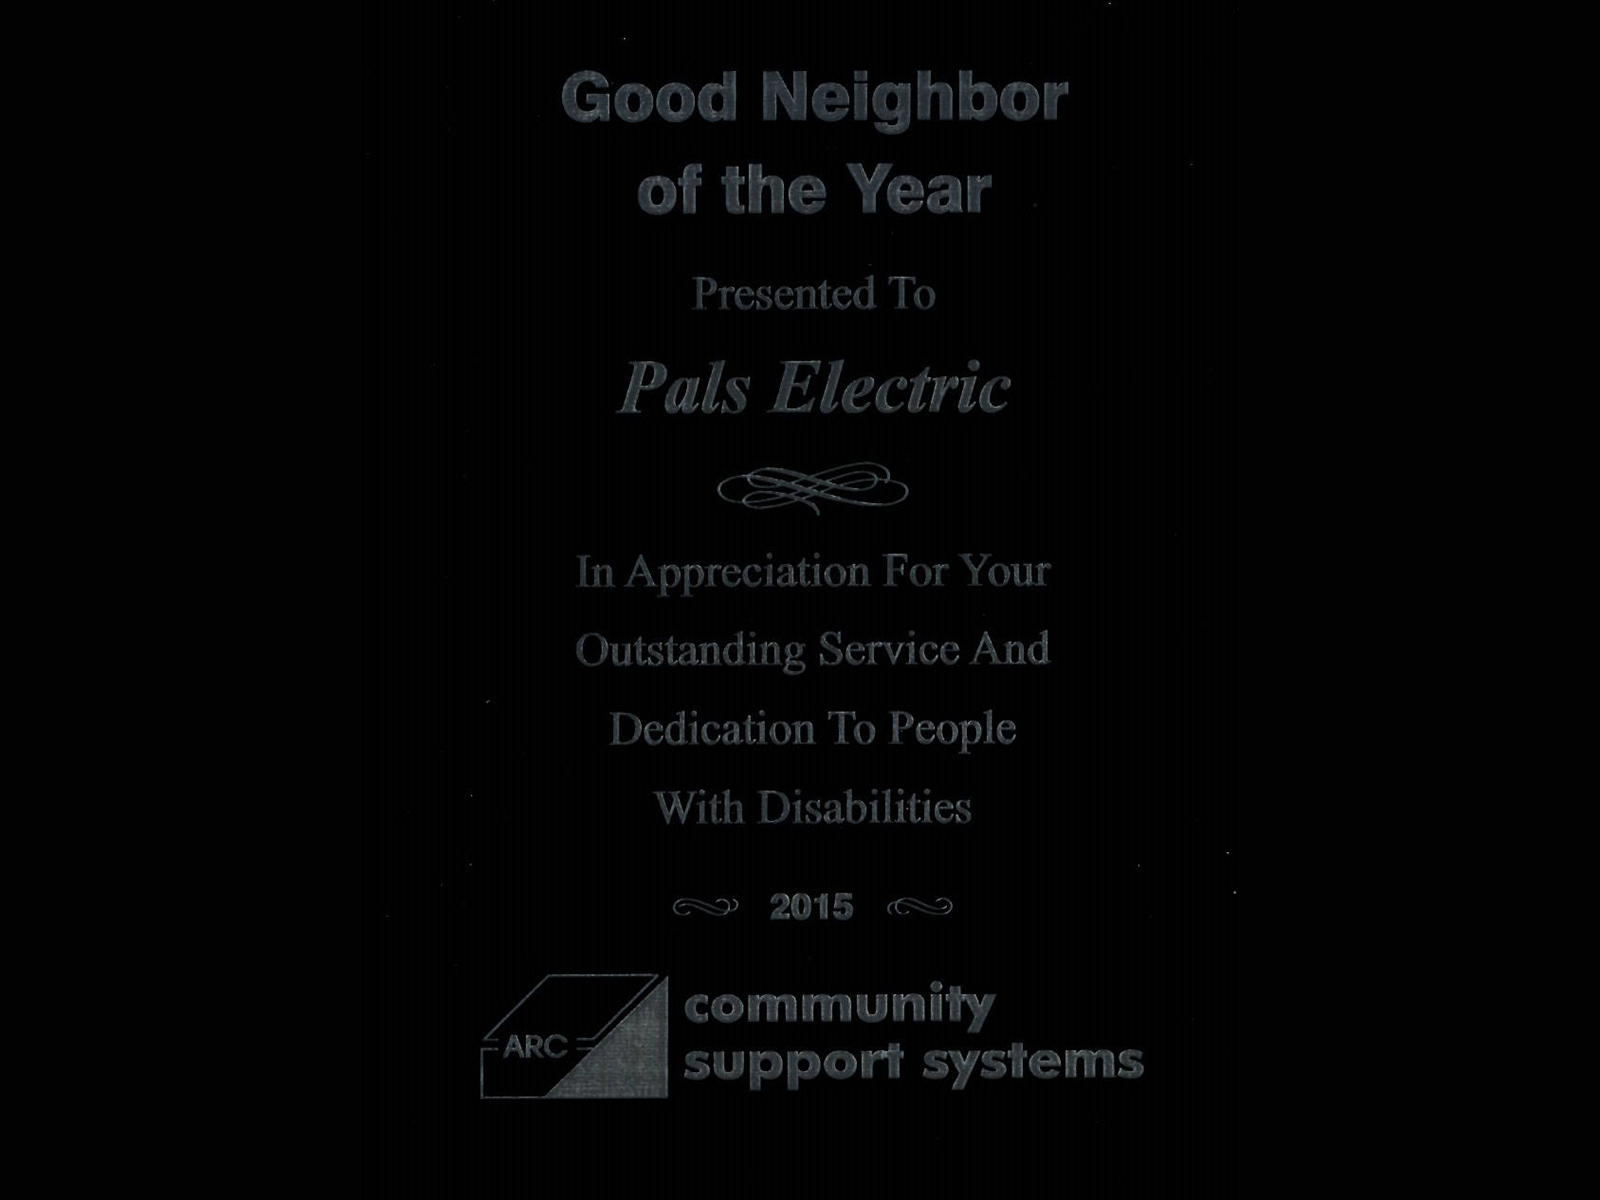 Good Neighbor of the Year presented to Pals Electric in appreciation for your outstanding service and dedication to people with disabilities - 2015 Community Support Systems